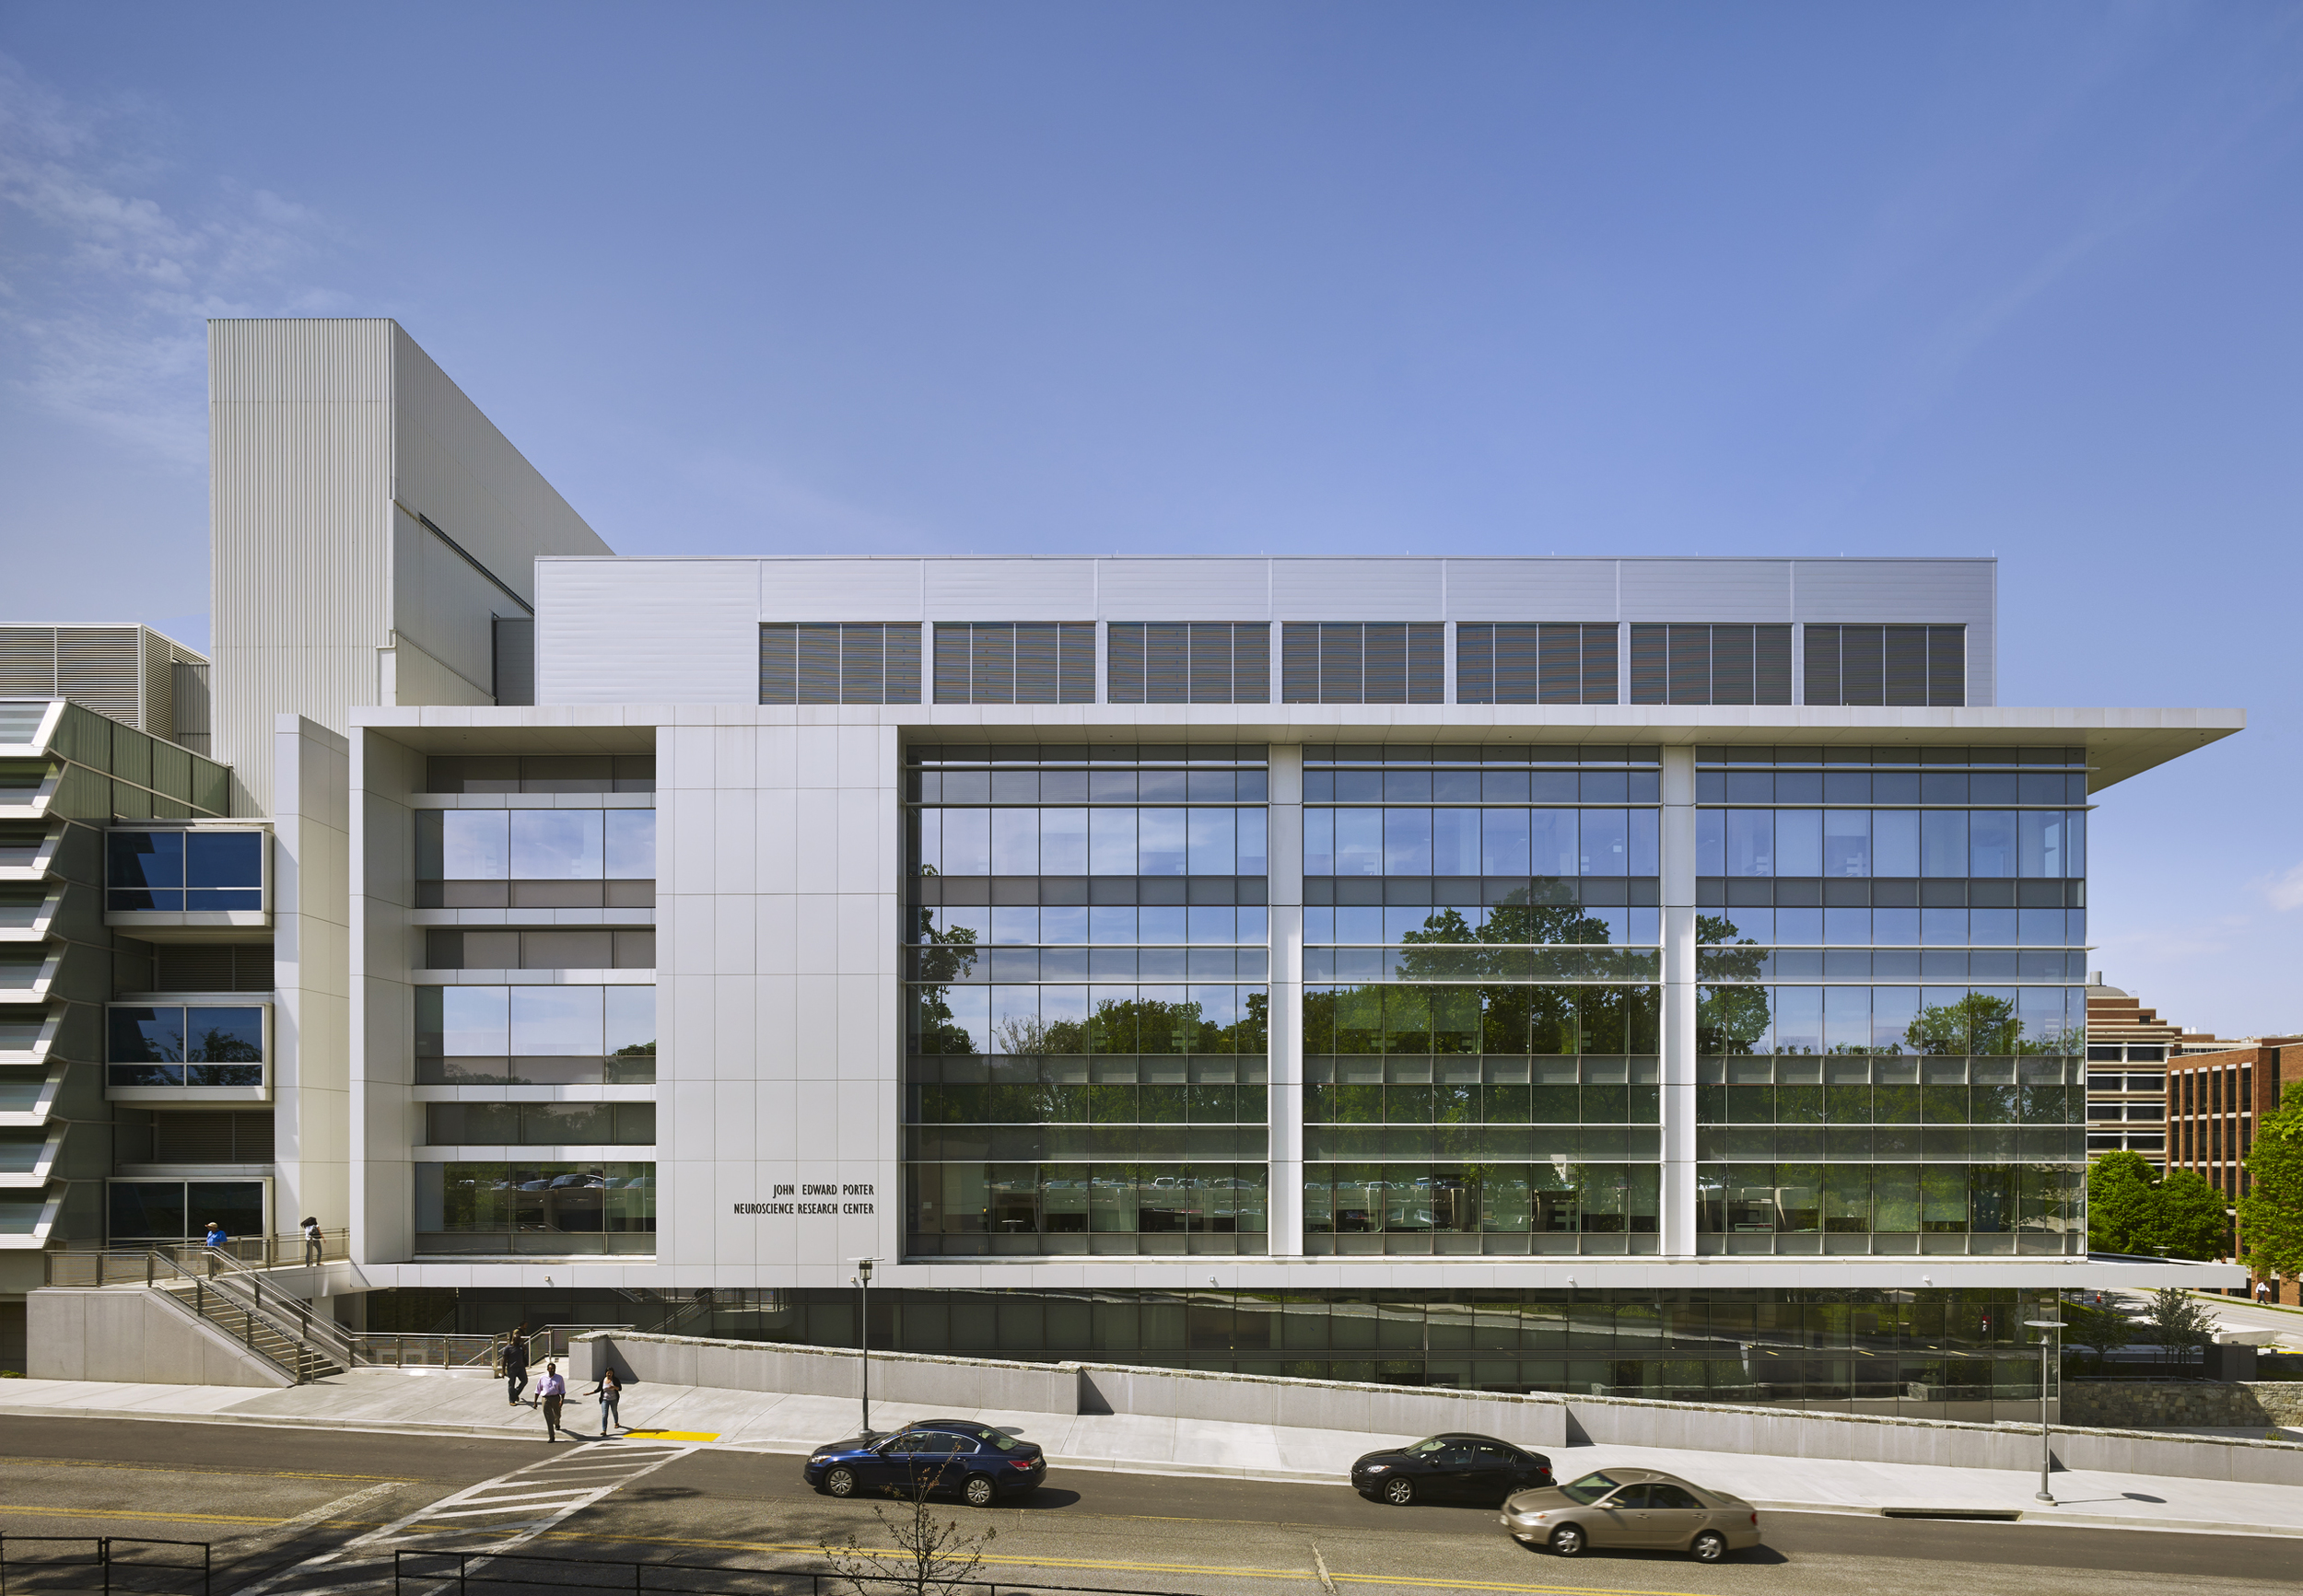  NIH Neuroscience Research Center  Perkins+Will  Bethesda, Maryland      Return to Projects  